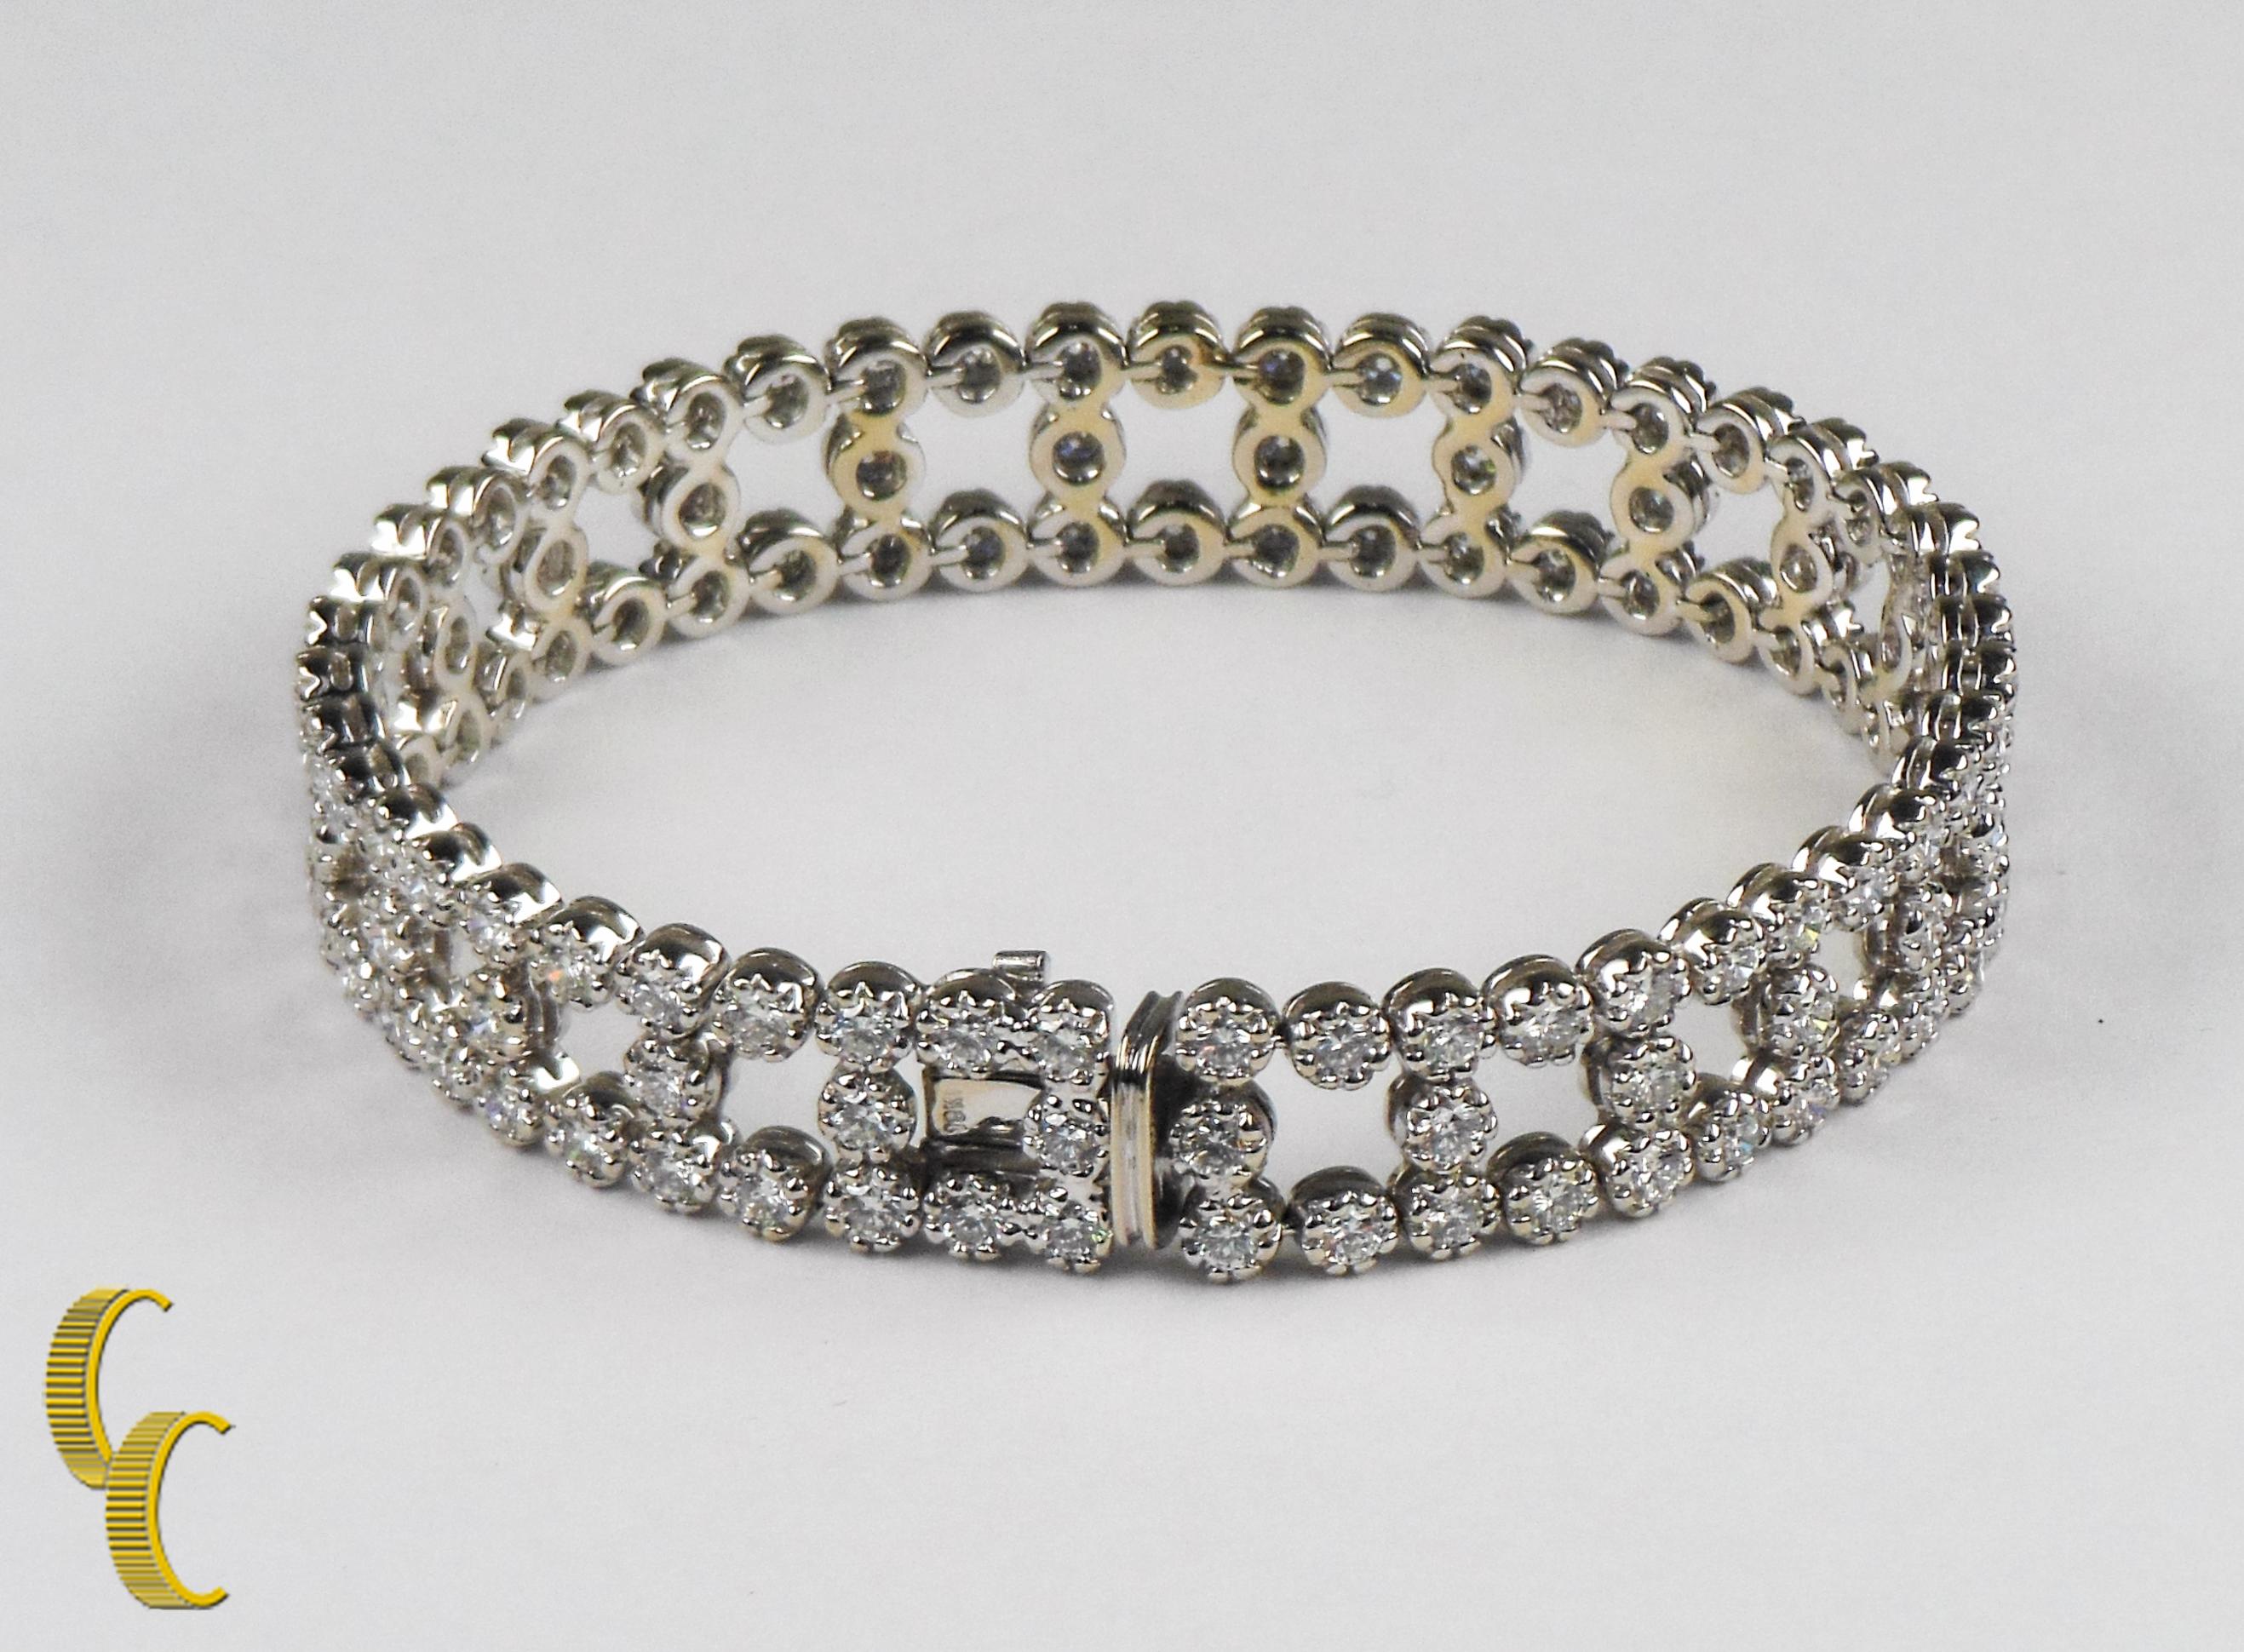 Beautiful Diamond Bracelet!
Great Gift!
7.15 Carat Total Weight
Total Weight of Bracelet - 32.34 g
The Bracelet Measures 11.57 mm wide and 3.50 mm thick
One Stamped 18k white gold lady's combination cast and assembled diamond bracelet with a box